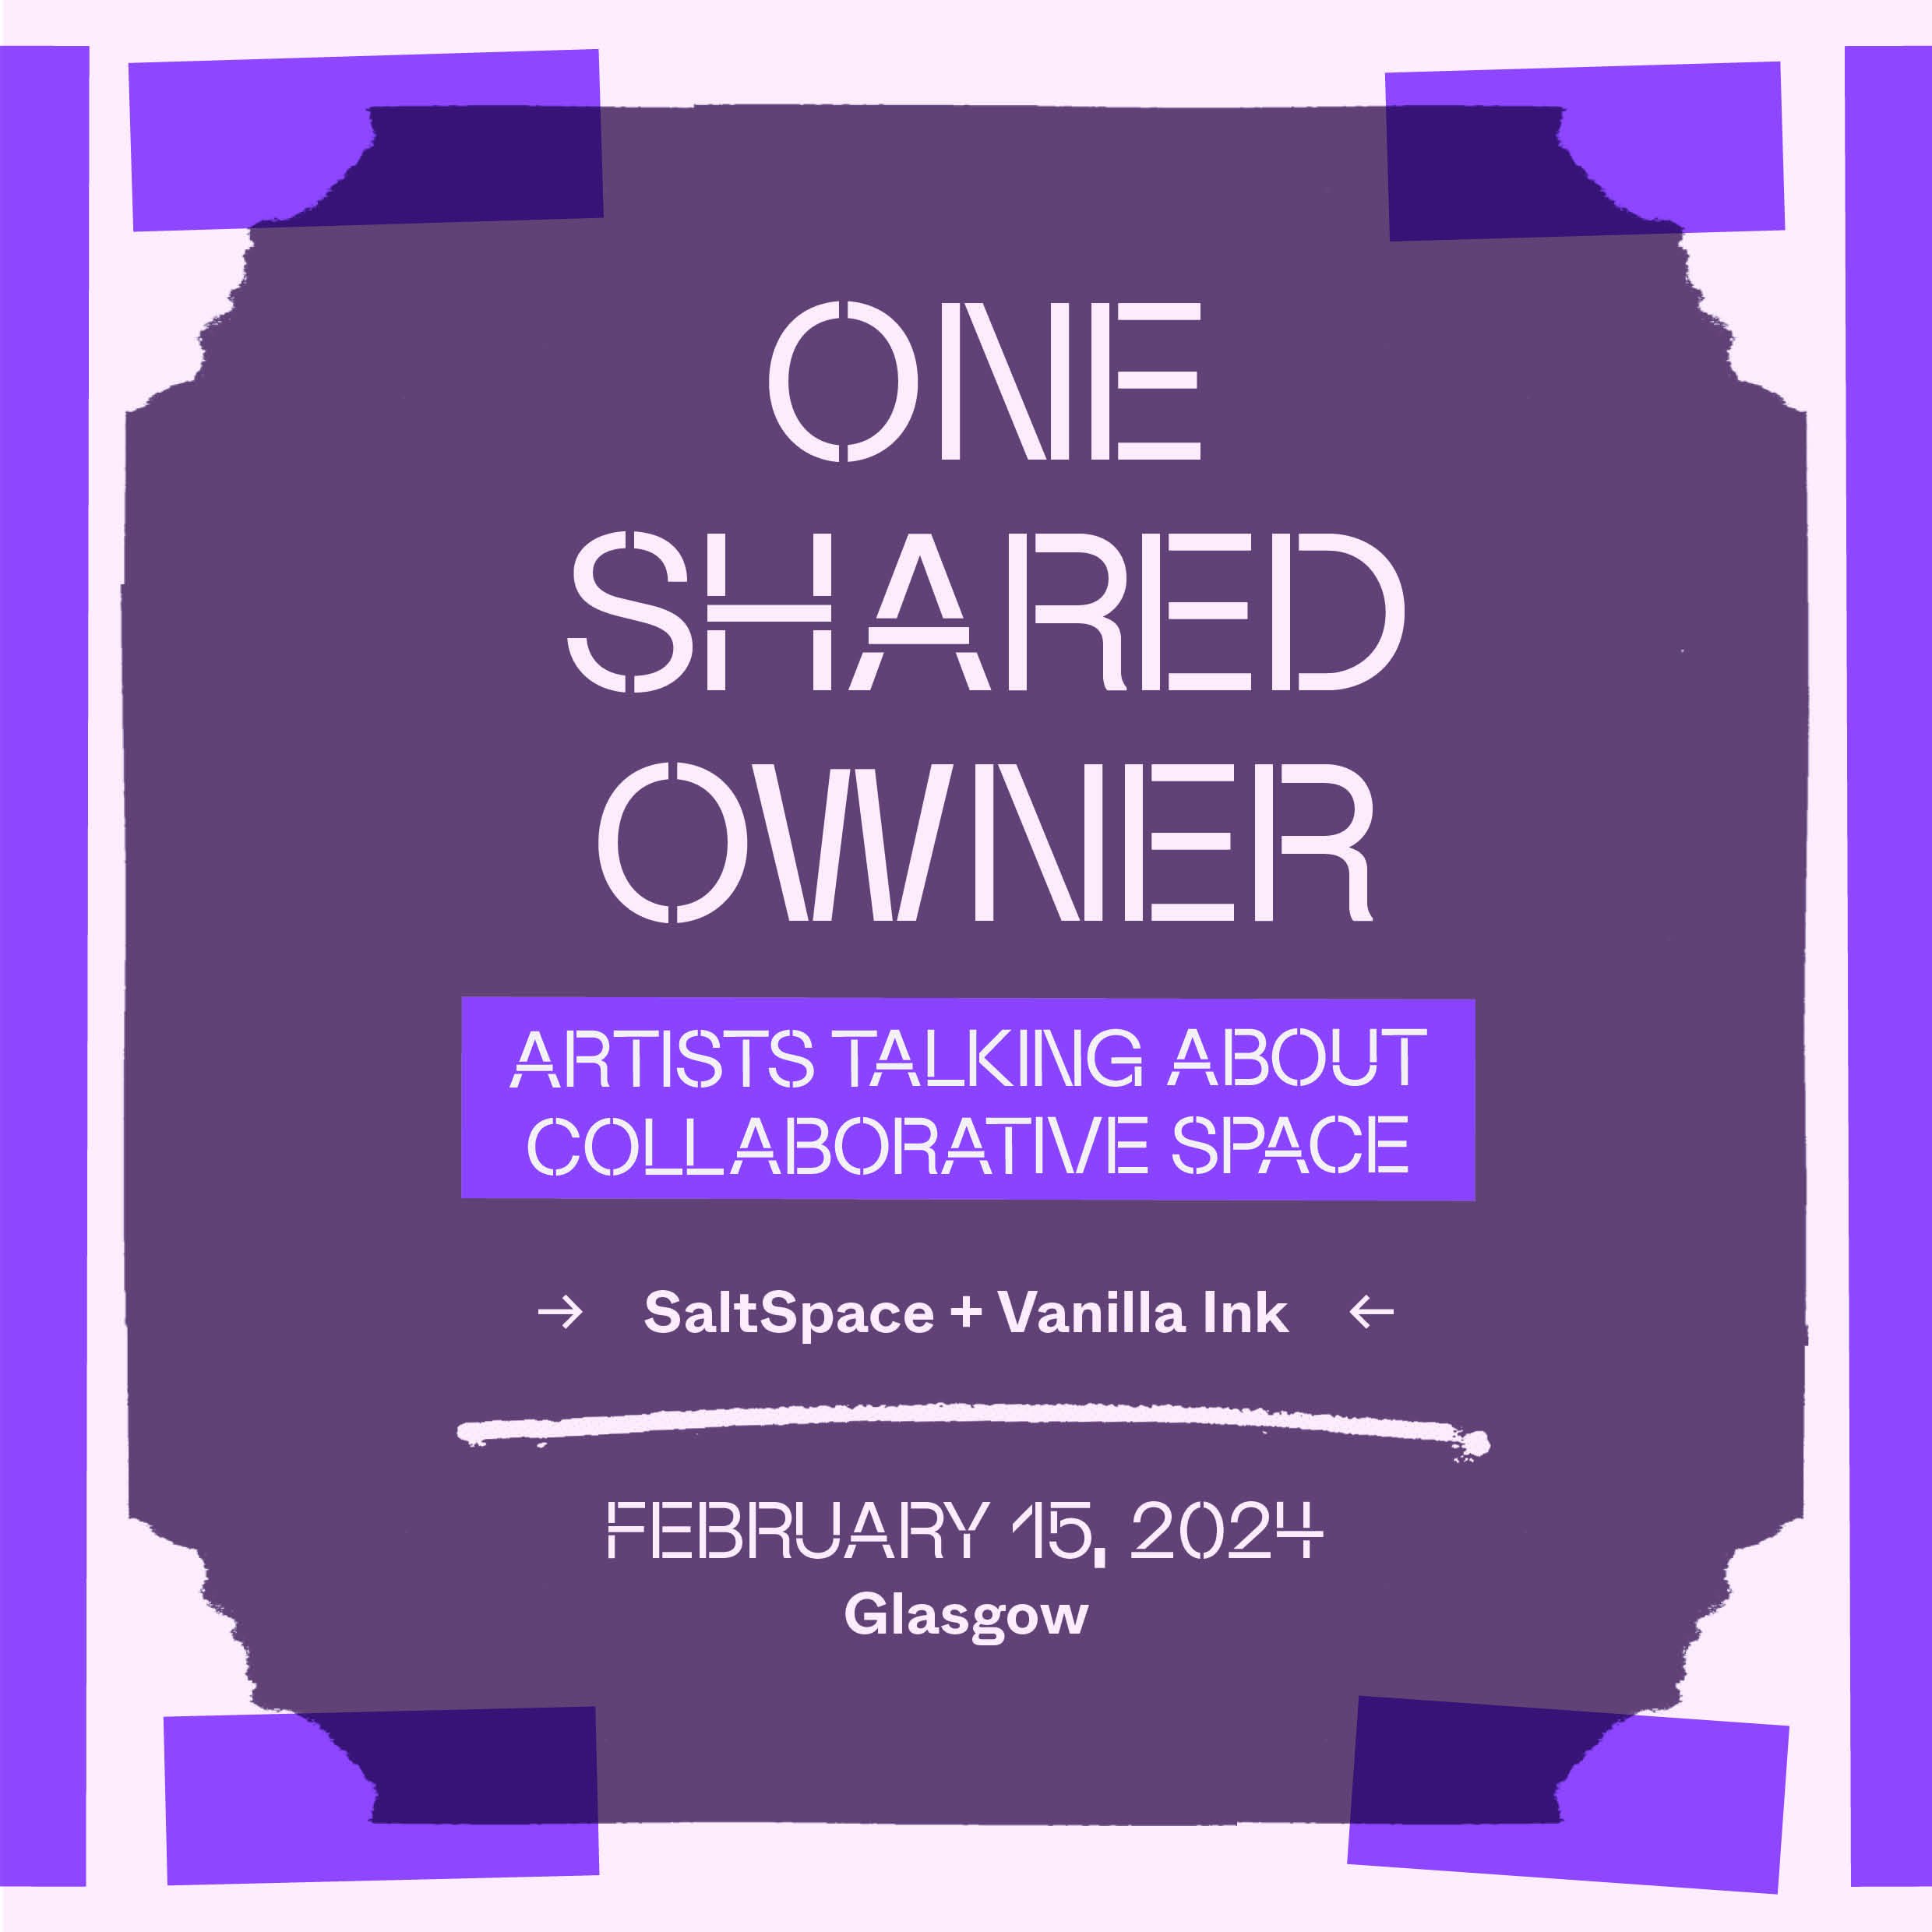 One Shared Owner: artists talking about creating collaborative space and sustainability - Glasgow